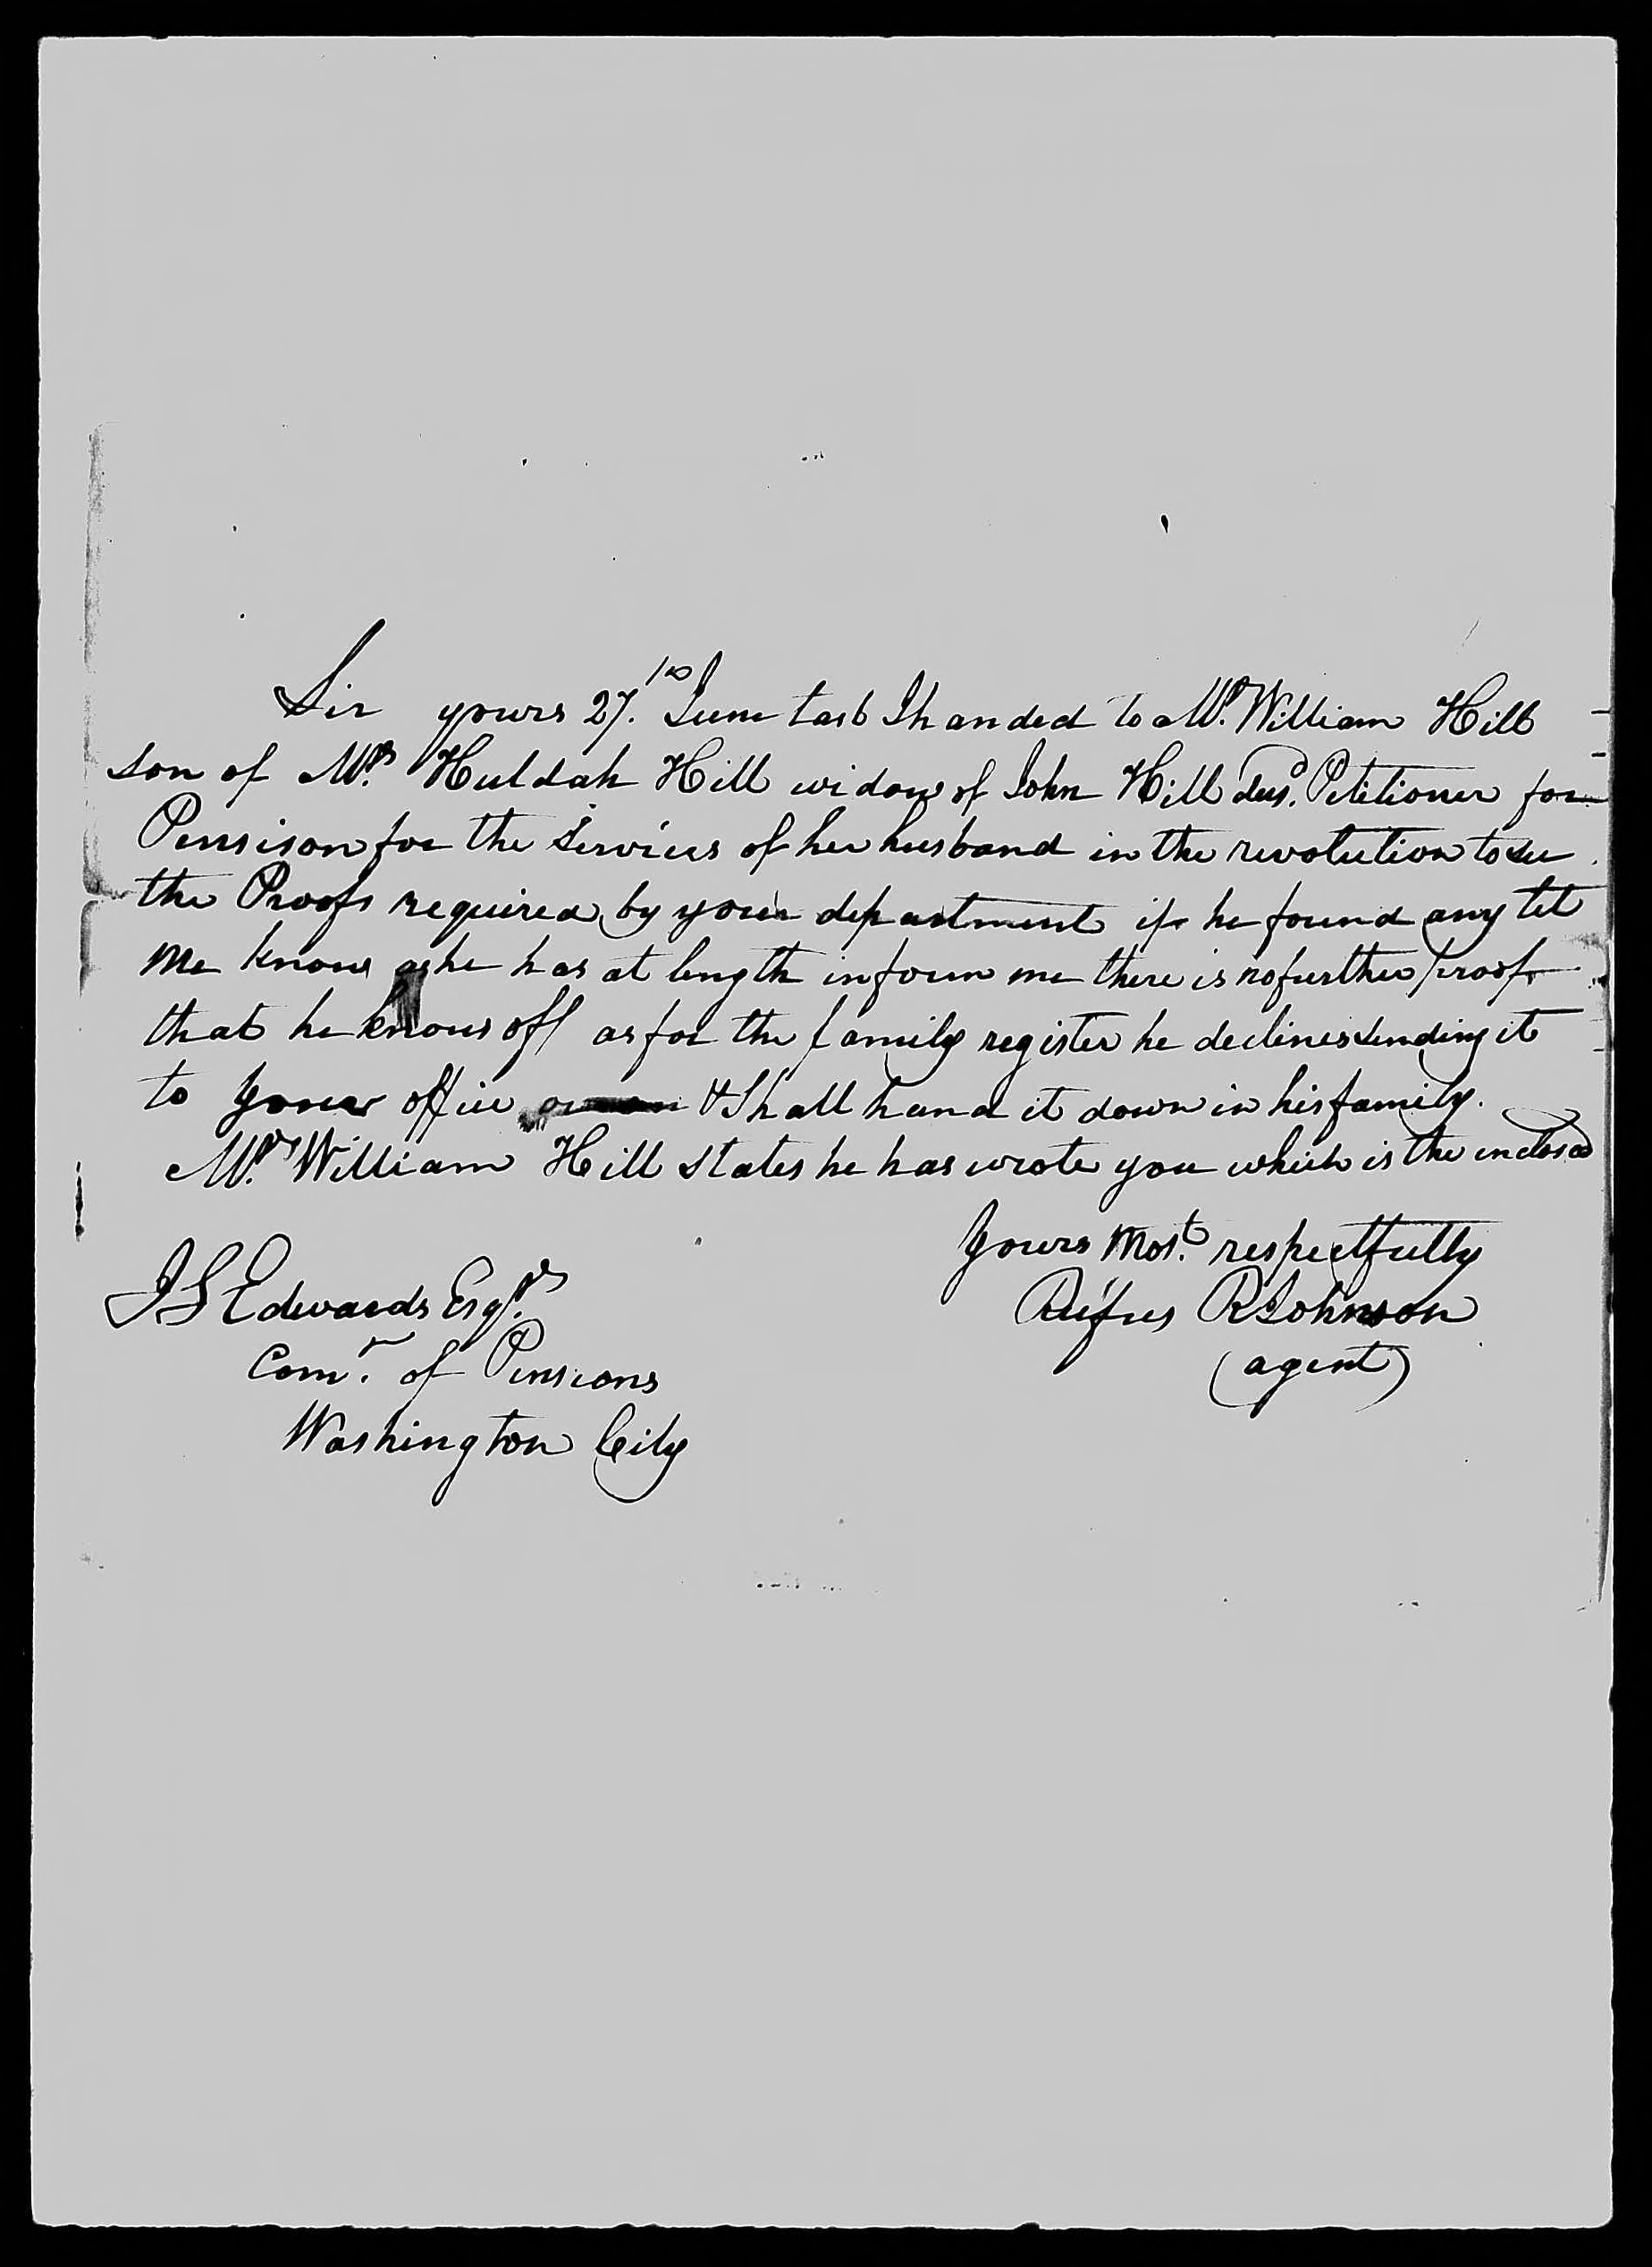 Letter from Rusfus R. Johnson to James L. Edwards, circa 9 October 1840, page 1